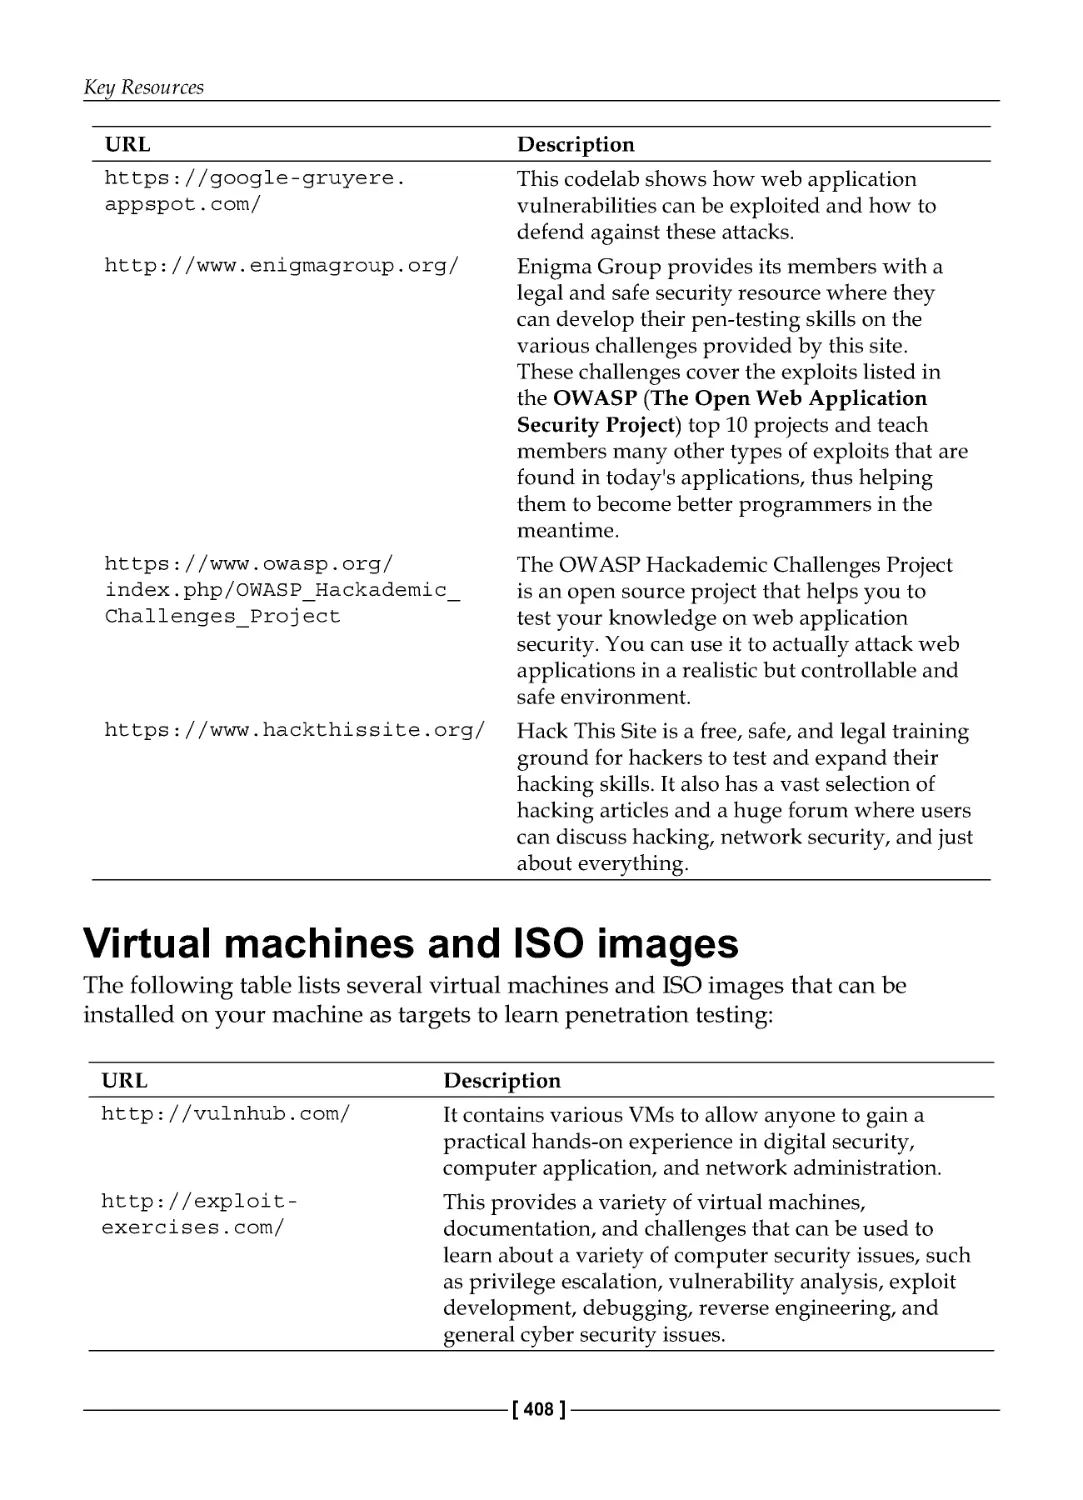 Virtual machines and ISO images